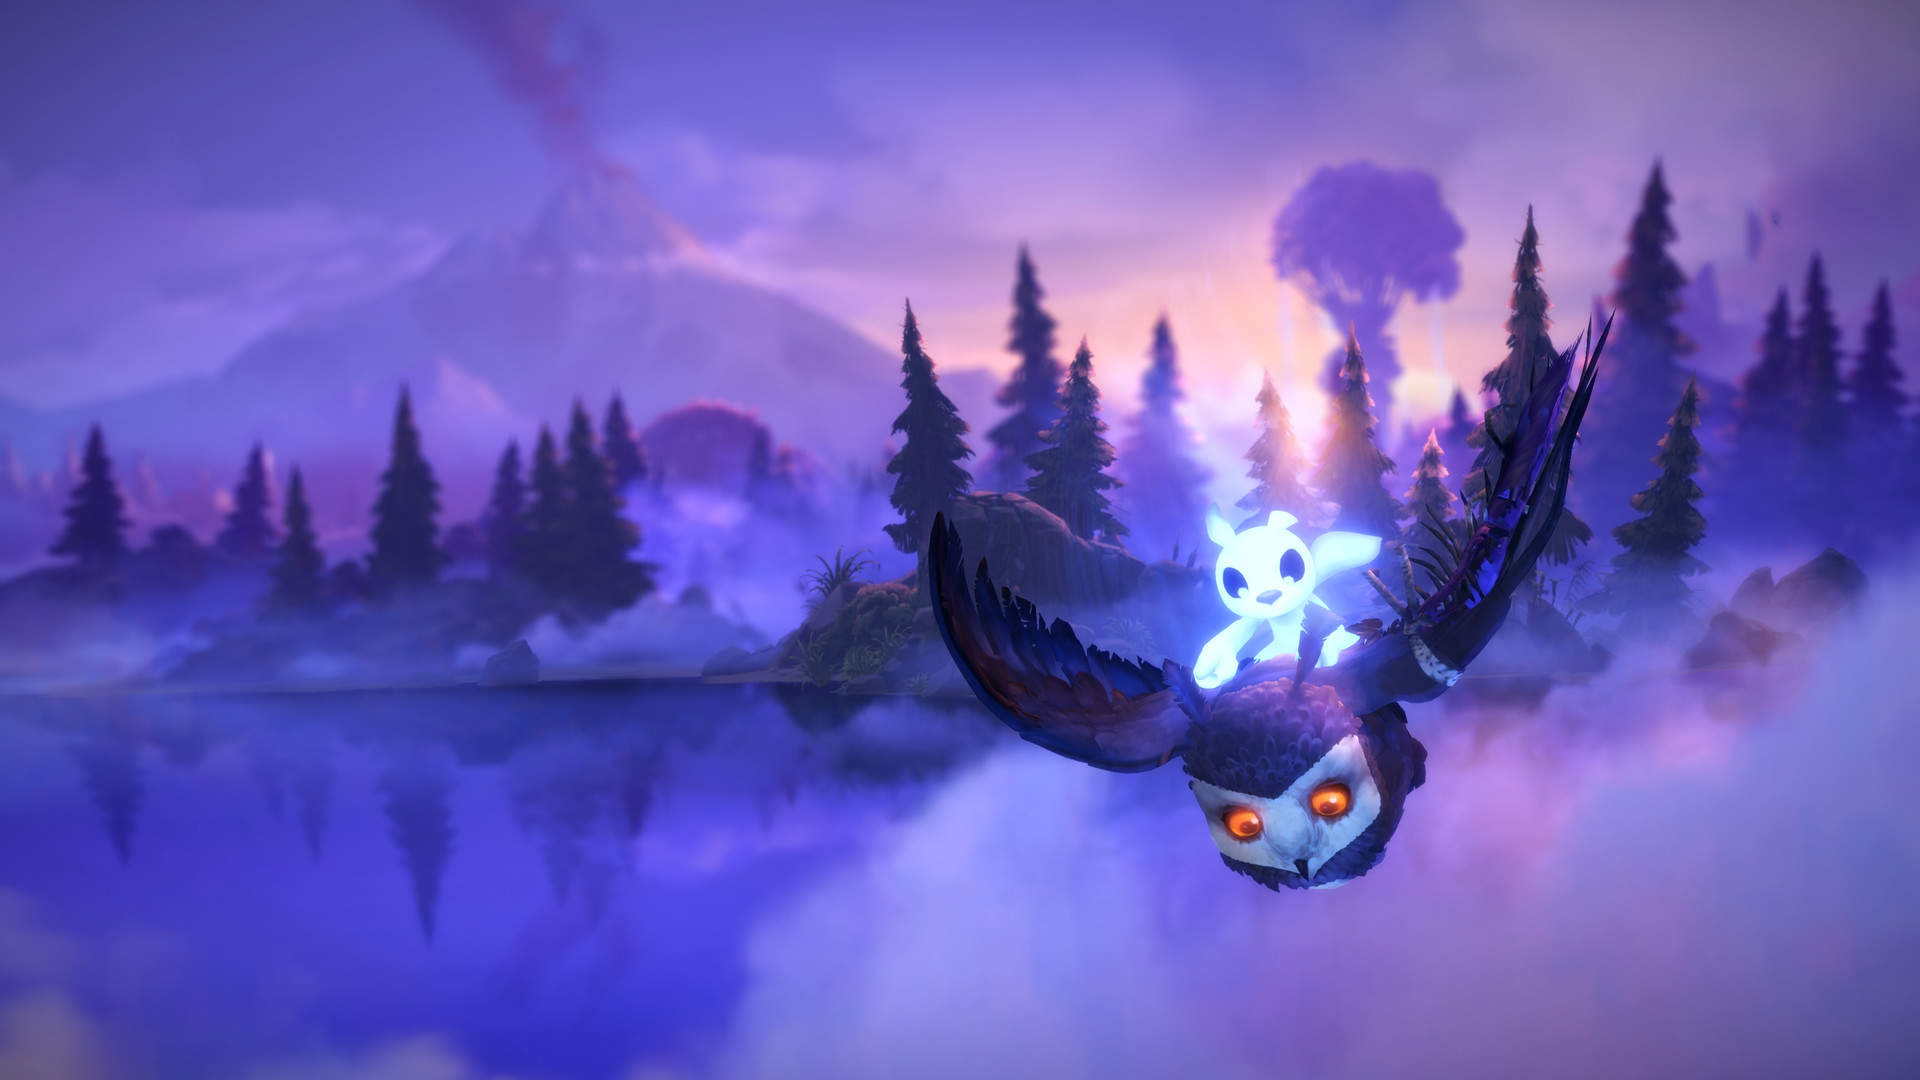 ori and the will of the wisps system requirements